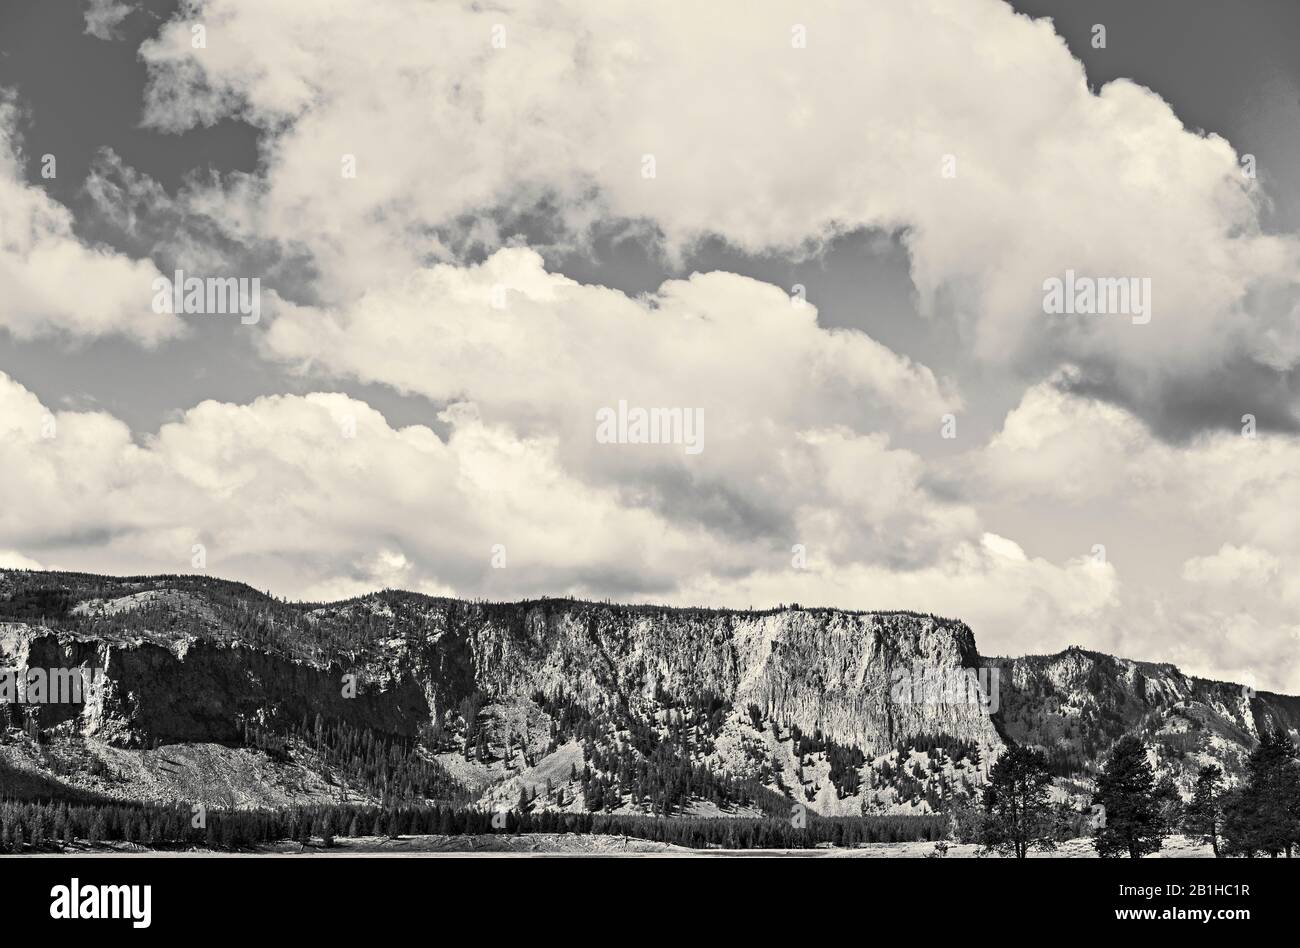 Scenic valley with steep rocky face of plateau on top. Large white fluffy clouds in the sky and forest below. Black and White. Stock Photo